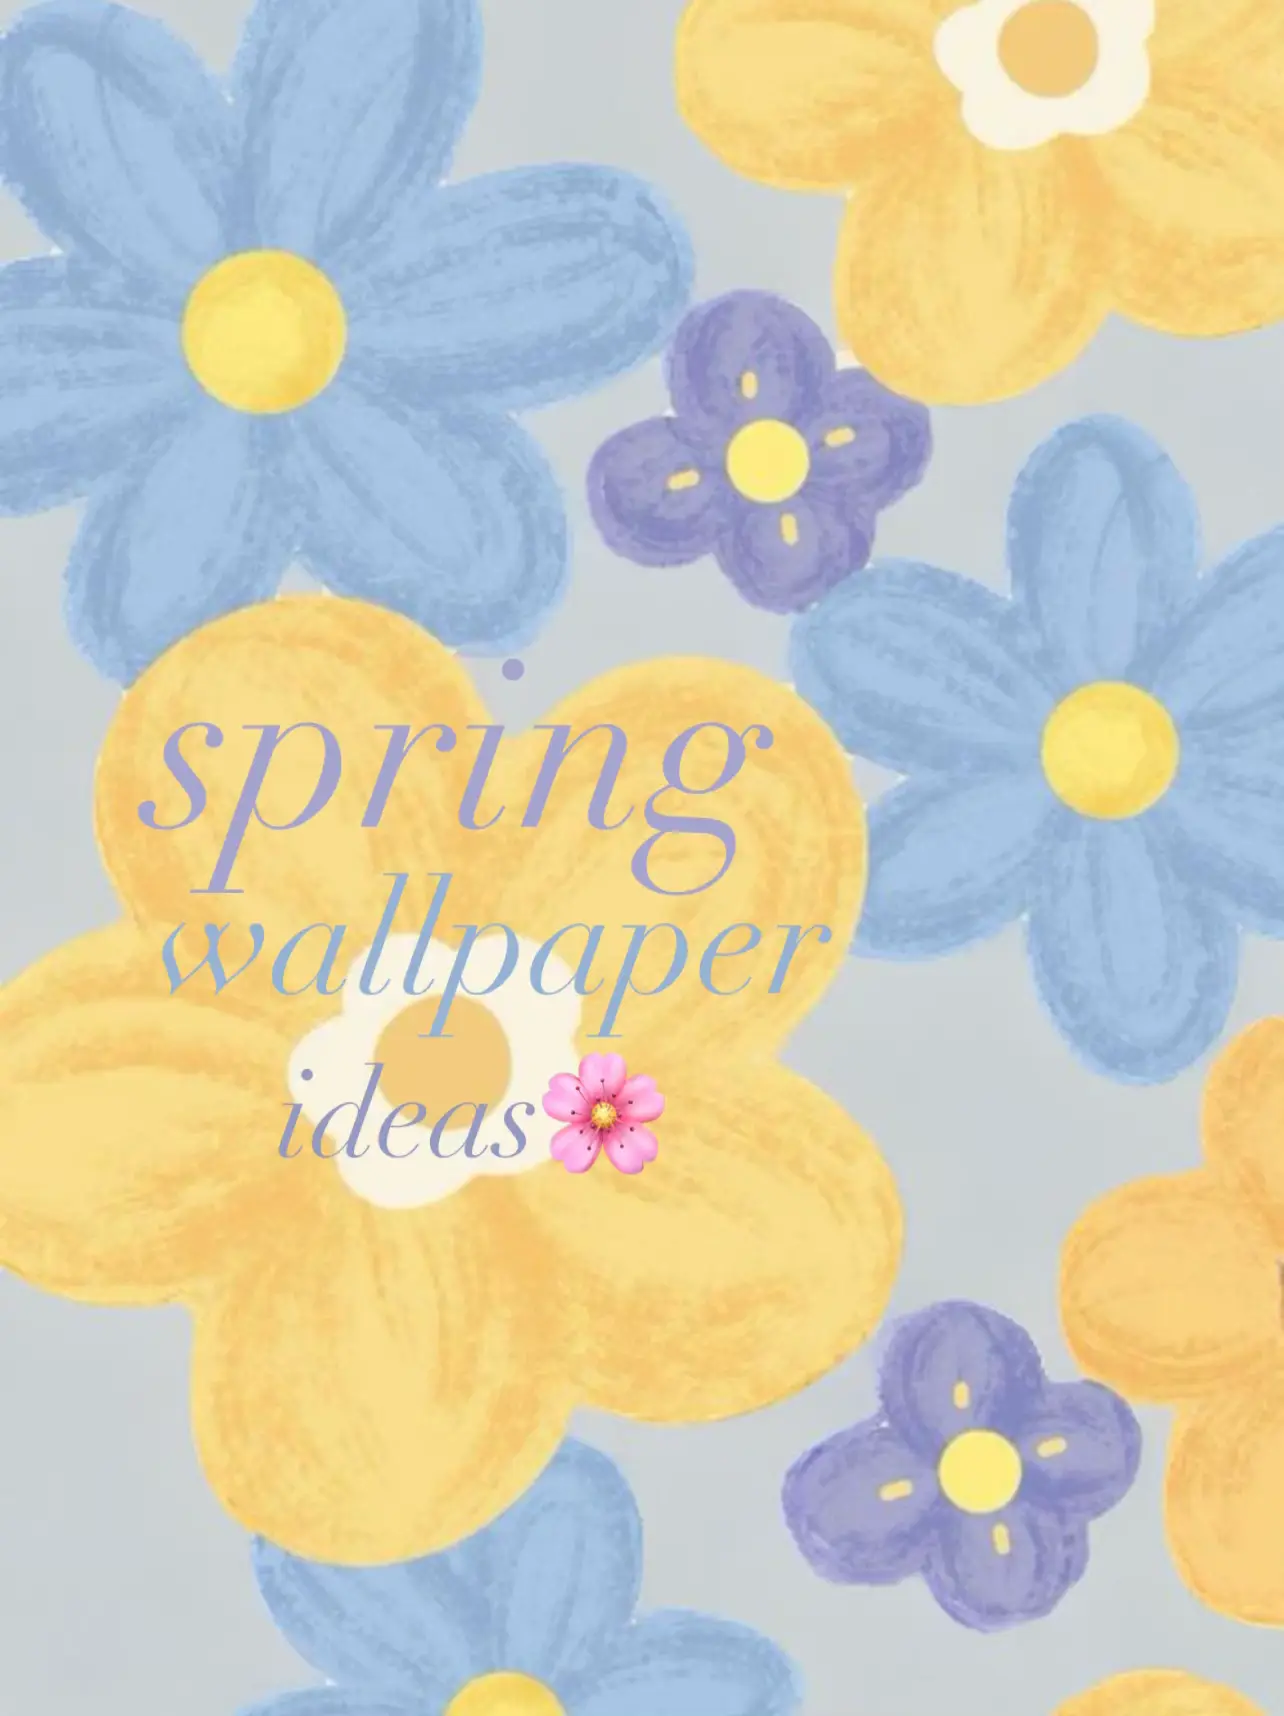  A flowery pattern with a quote about spring.